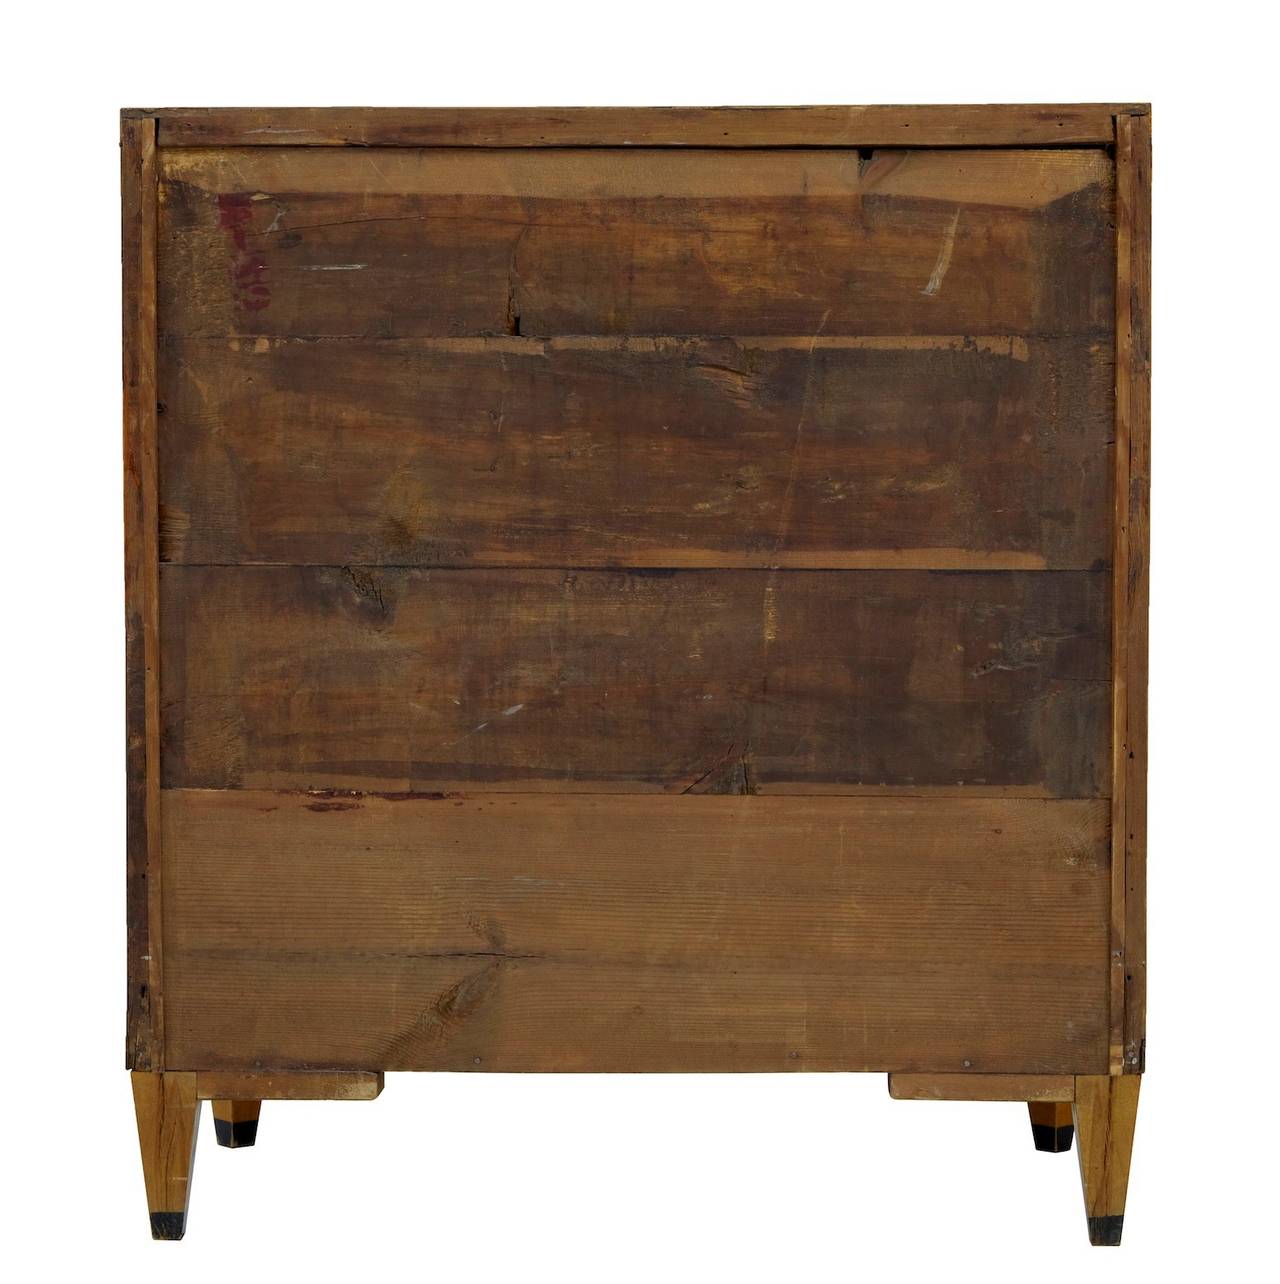 19th Century Inlaid Swedish Birch Chest of Drawers For Sale at 1stdibs